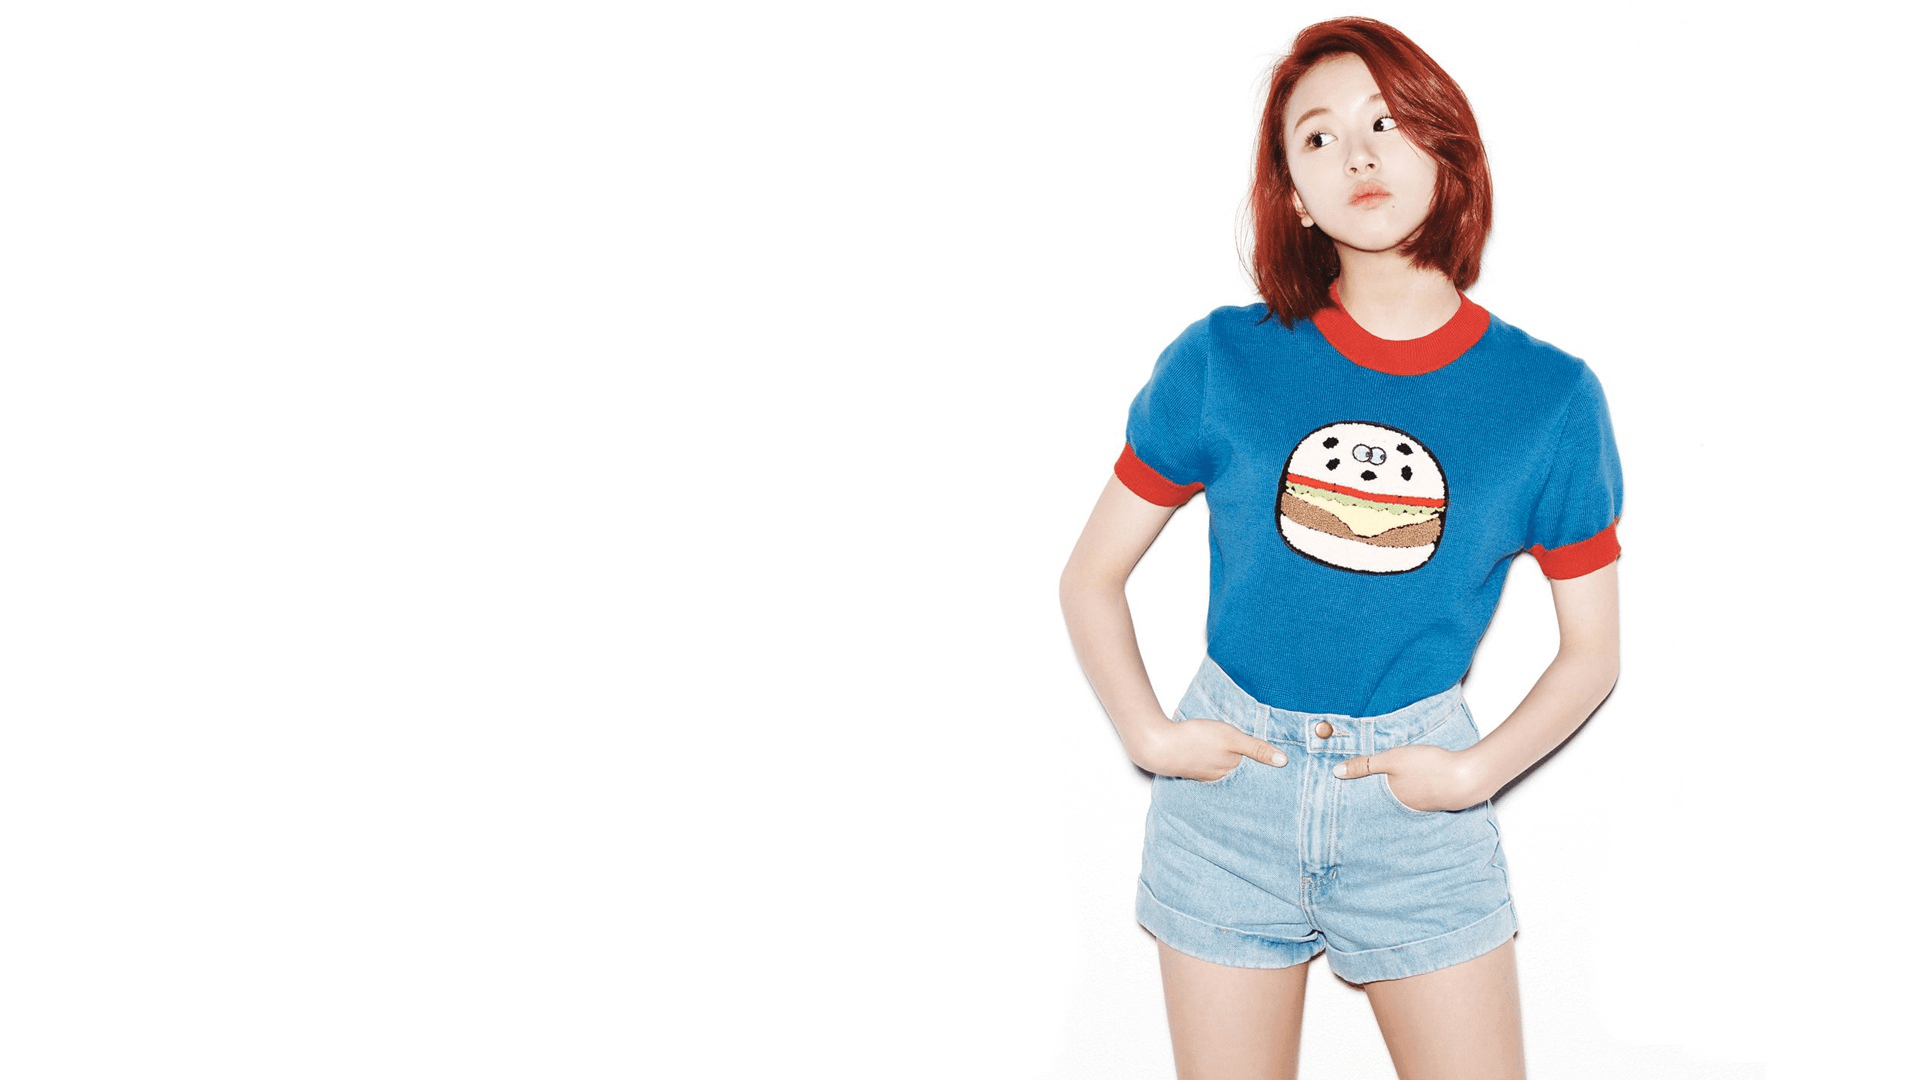 Twice Son Chaeyoung 1080p Wallpaper